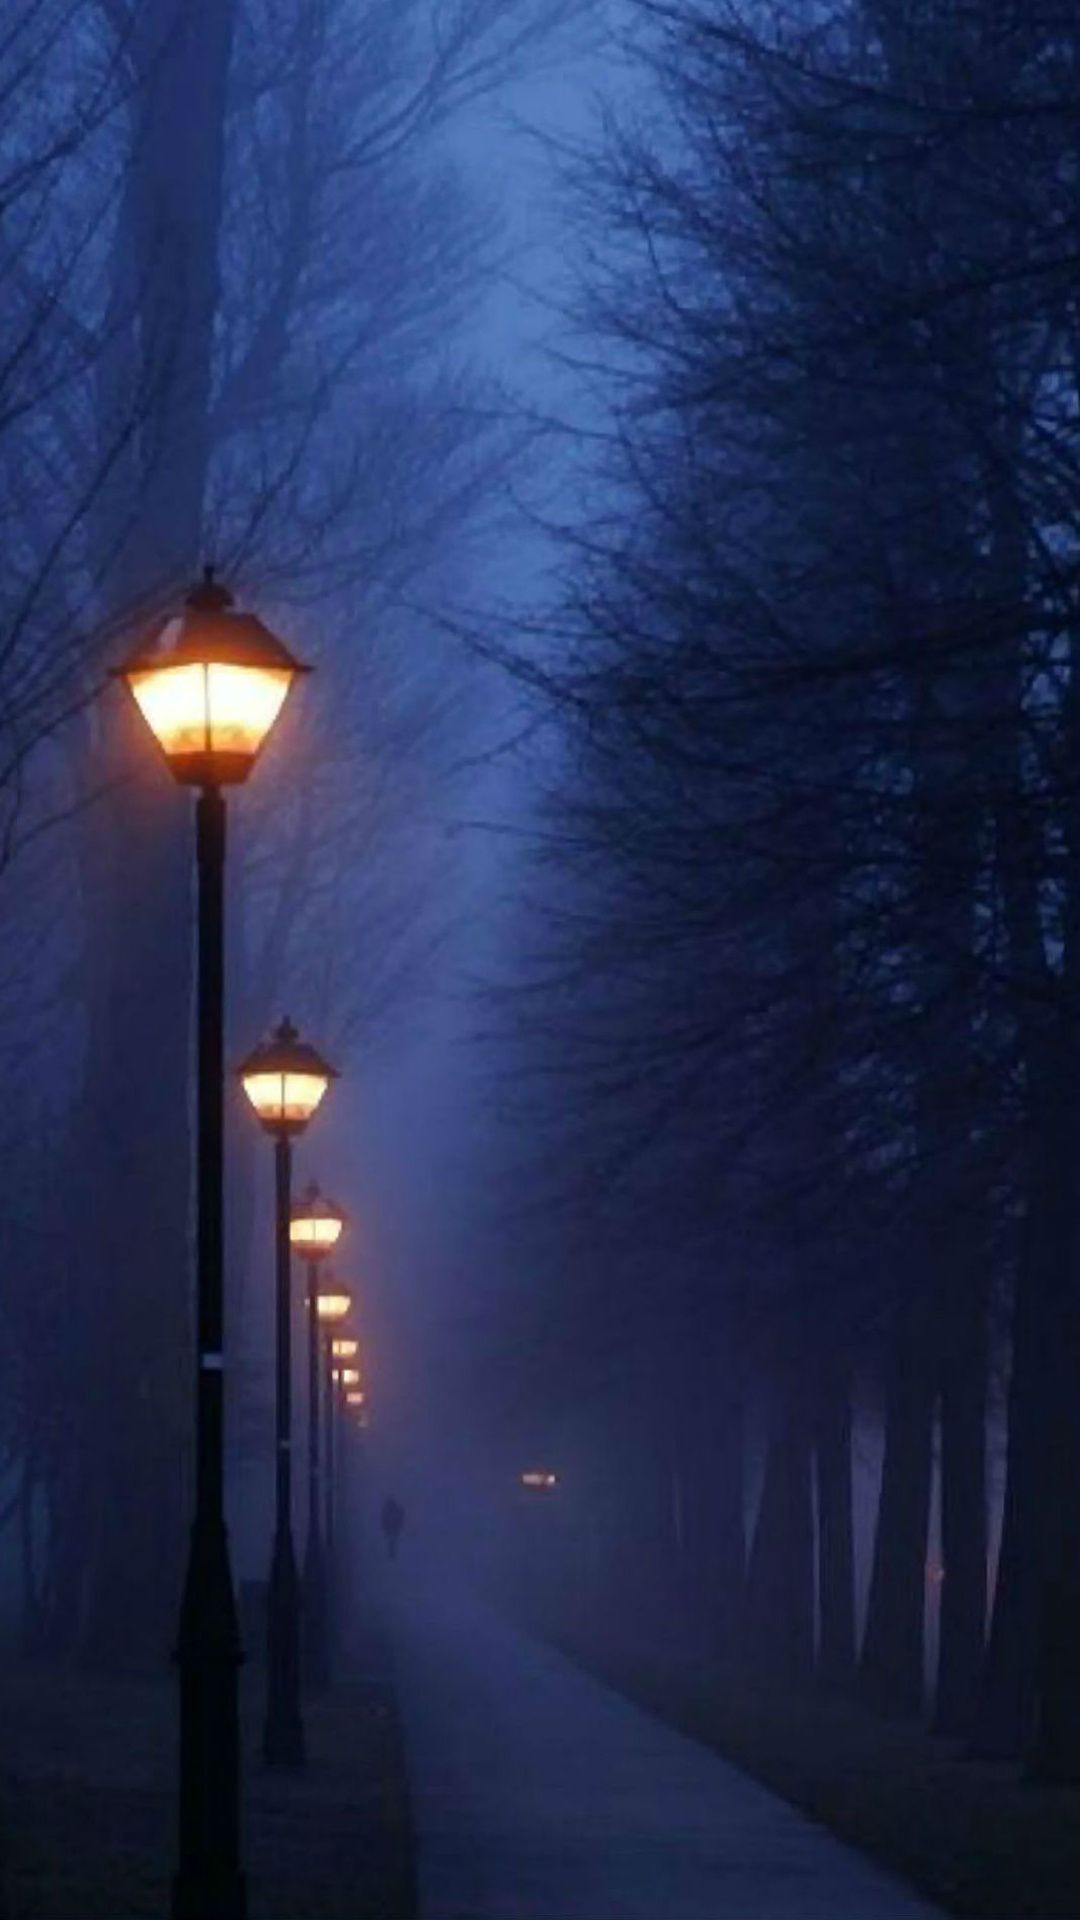 Gallery A Foggy Night In Paris Mobile Hd Wallpaper. Picture, Mists, Beautiful Places